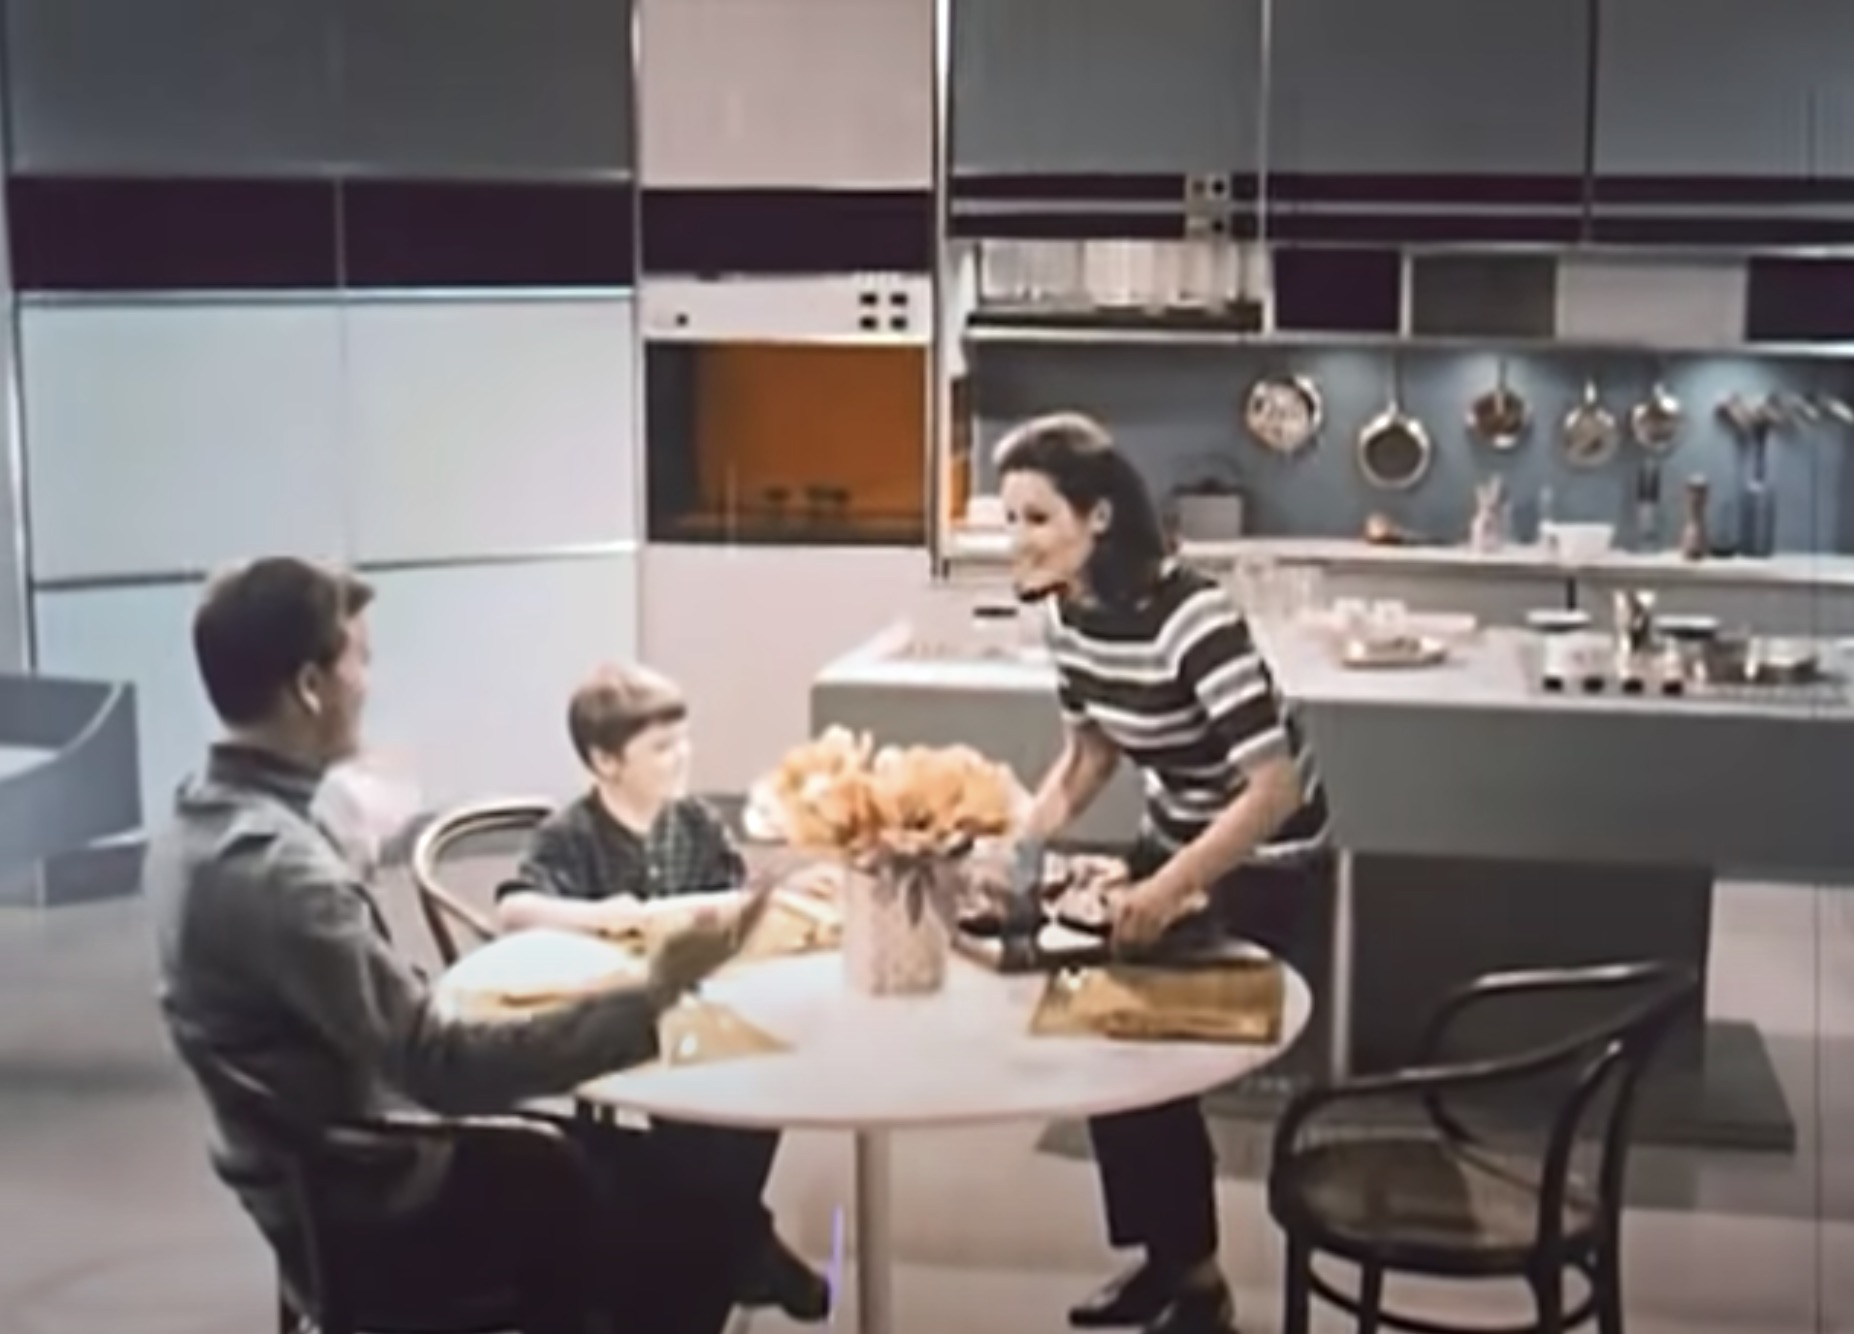 Future Family eating dinner in 1999, as imagined in the 1960's.